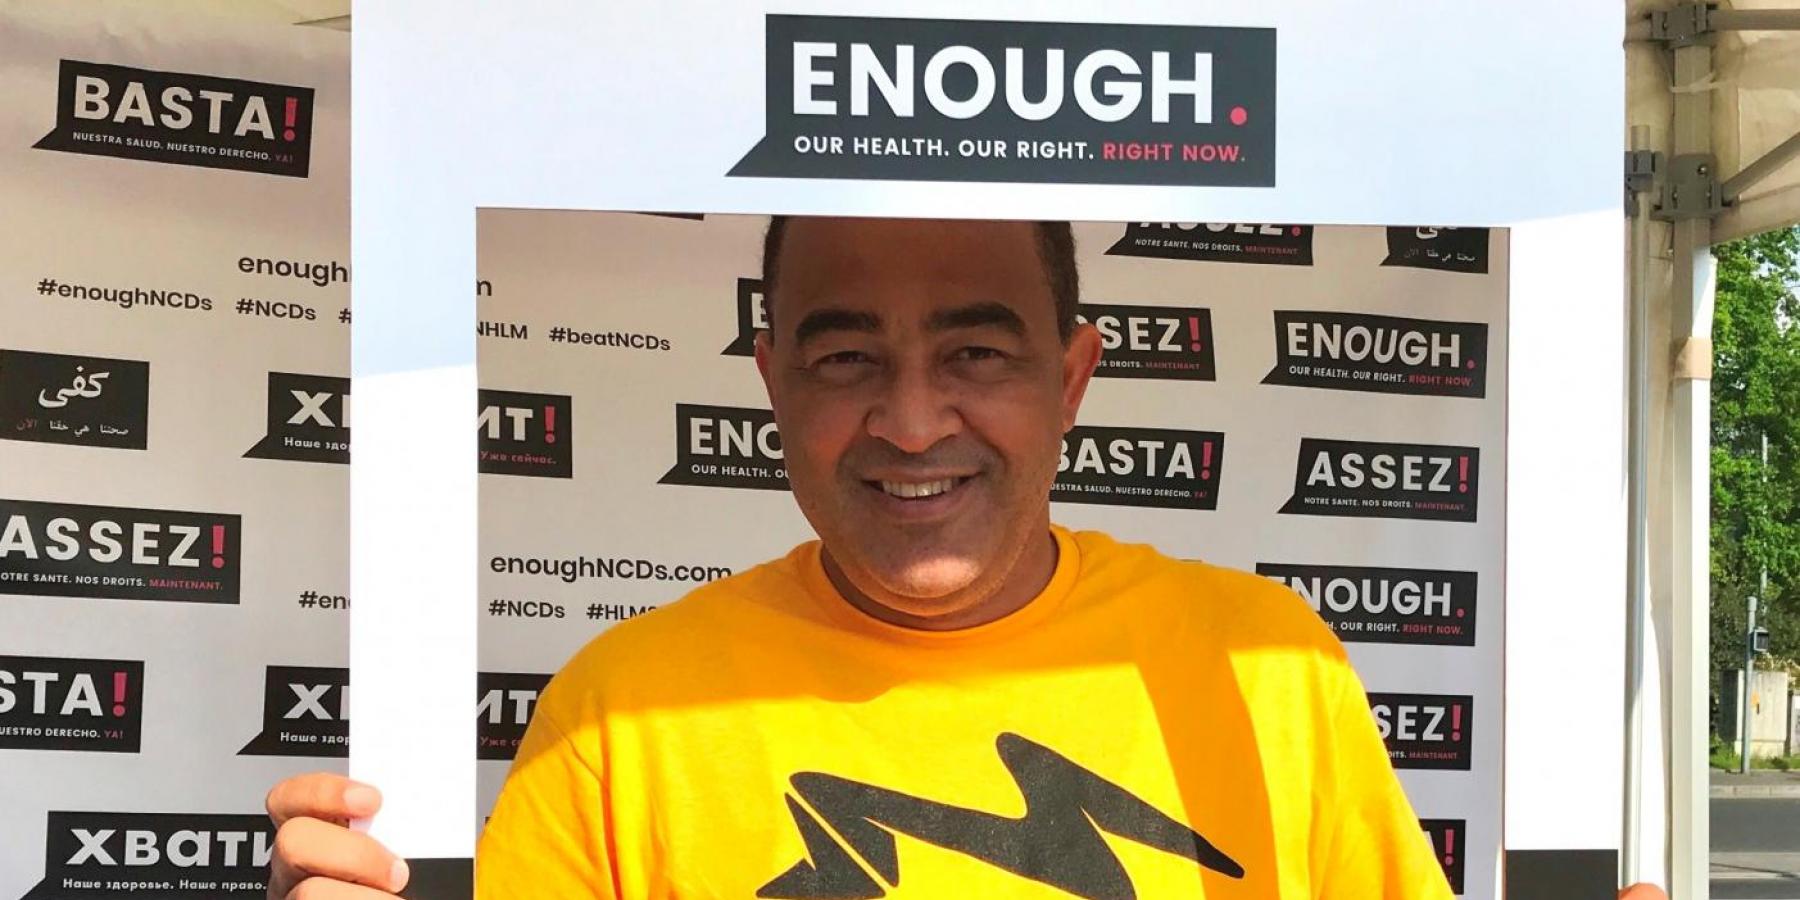 Jamaica's Minister of Health, Dr Christopher Tufton, framed by NCDA's Enough campaign at the WHO Walk the Talk event in Geneva, 20 May 2018